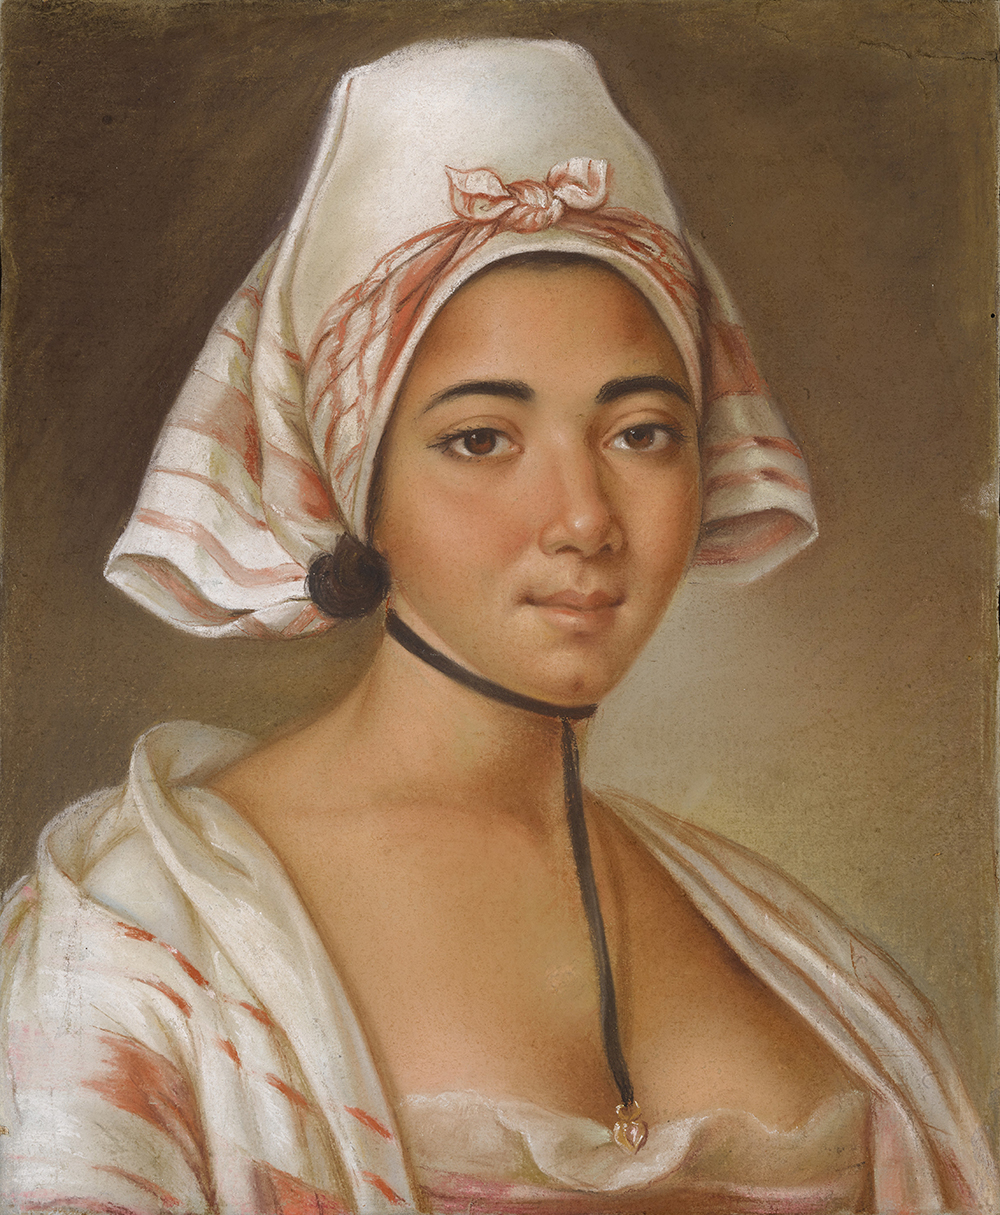 Pastel portrait of a light-skinned, biracial woman wearing a choker and pink-and-white striped shawl and tied headdress